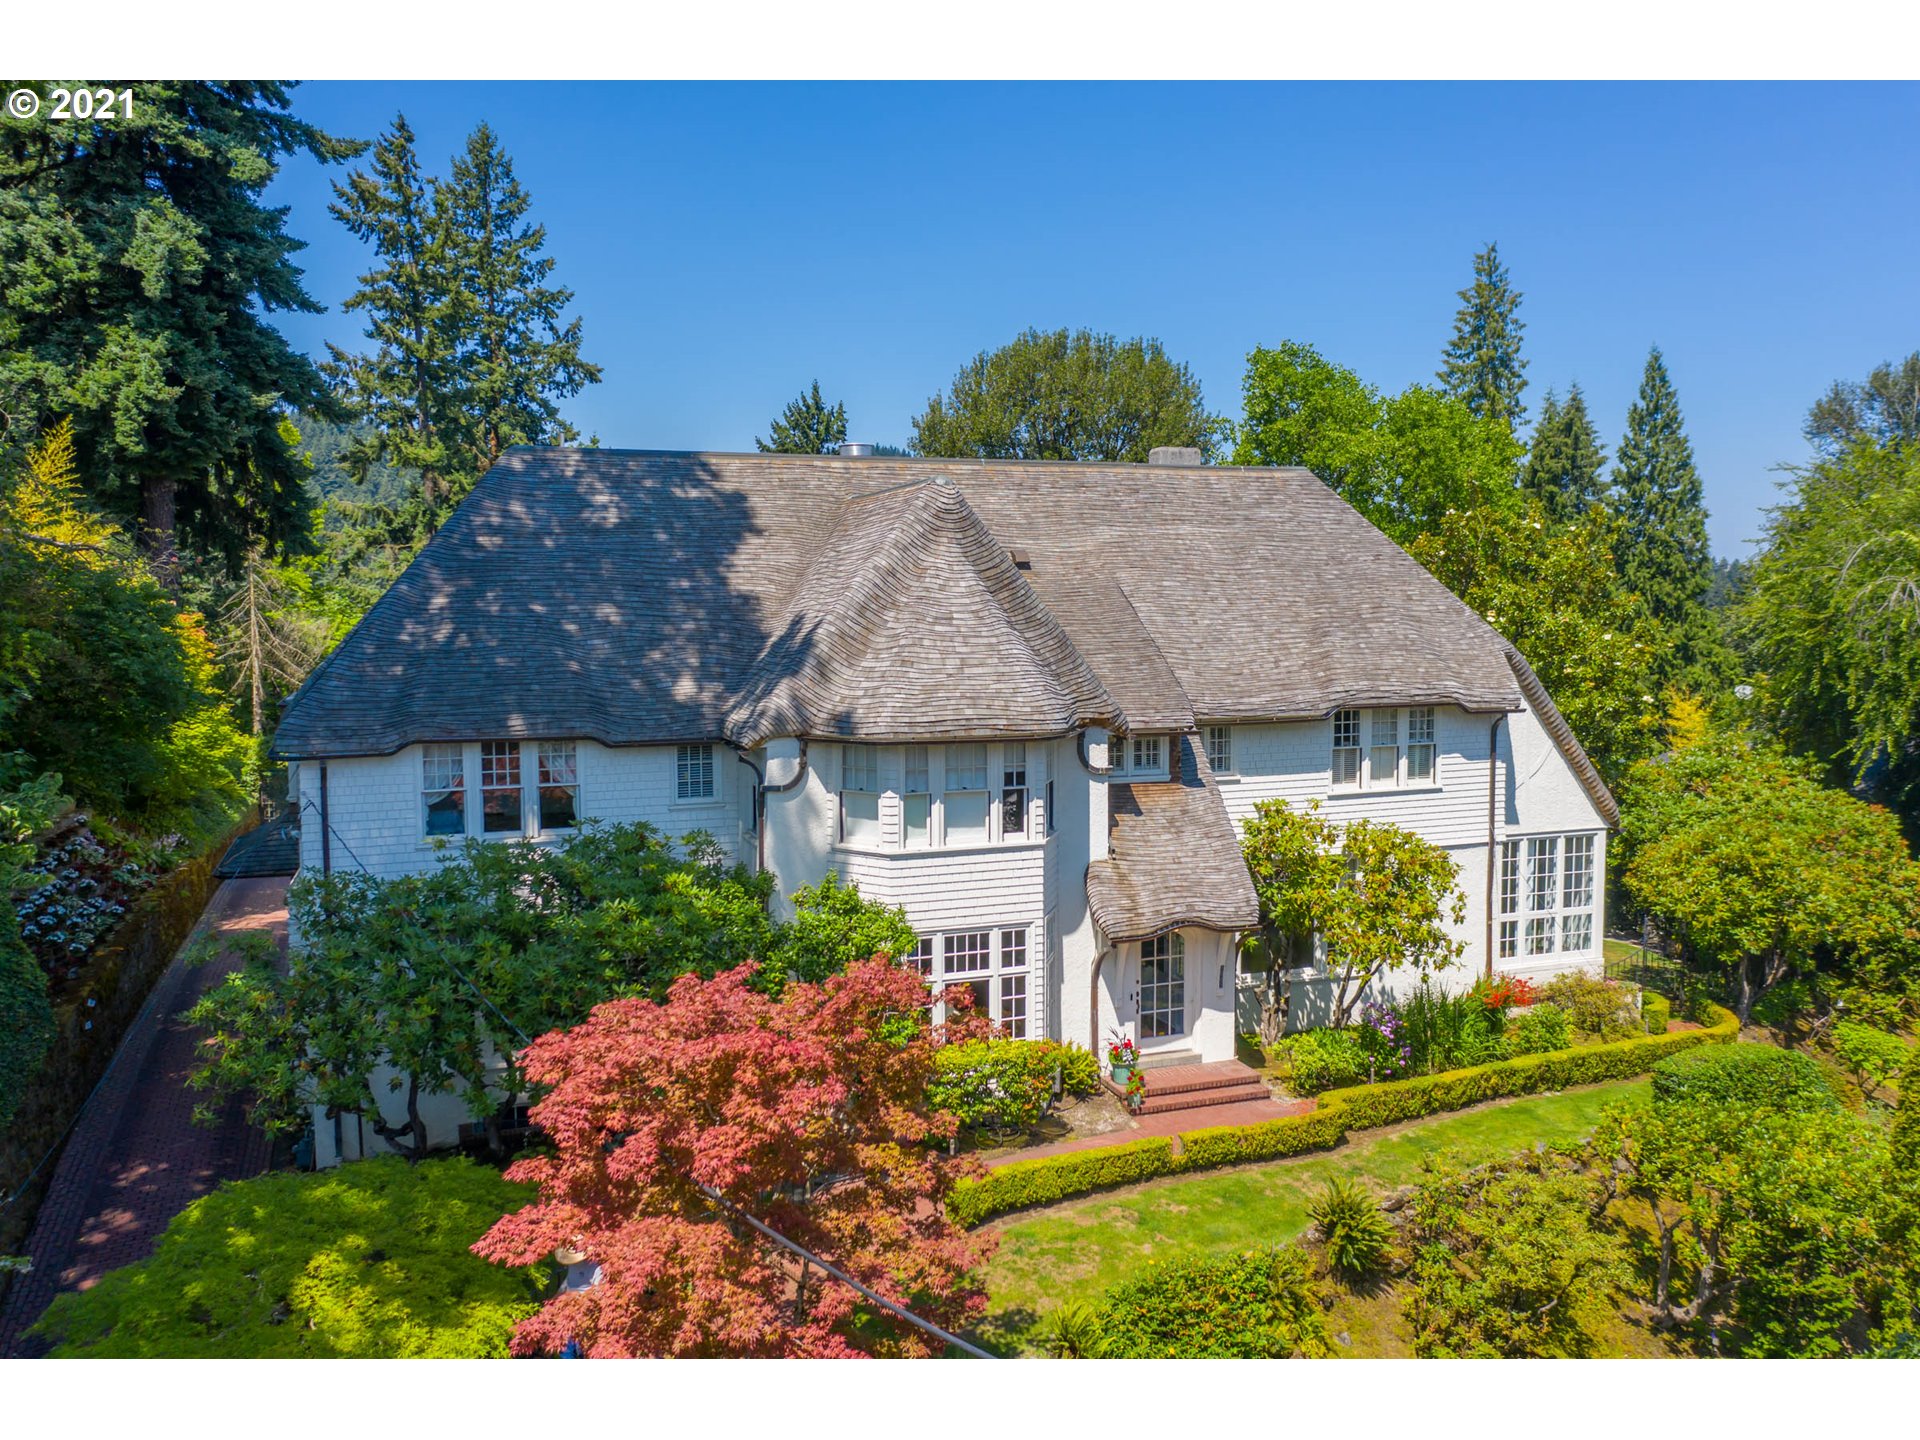 OPEN 9/26 TUESDAY FROM 12-2PM. On an amazing street of exceptionally well-designed residential architecture, sits proudly the very typical English Cottage design by A.E. Doyle.  Offering panoramic views, the house sits high on a ridge above SW Montgomery.  The home with its lengthy driveway offers privacy and garage.  The home's exterior has English Cottage rolled eaves, as well as rolled ridges on its newer wood shake roof. Stucco combines with shingle siding and river rock on its distinctive exterior.  The interiors are relaxed and inviting, with the welcoming grand staircase, multiple wood burning fireplaces, and warm wood trim.  All rooms enjoy spectacular views of the city to the East or the terraced hillside gardens to the West.  Owner's suite consists of several rooms facing the city side that include bedroom, bath, dressing room & writing room with fireplace.  Kitchen features multiple rooms for cooking, casual dining,  spacious butler's pantry, & home office. Walking distance to popular Alphabet district for shopping and dining, STEM program schools and parks.